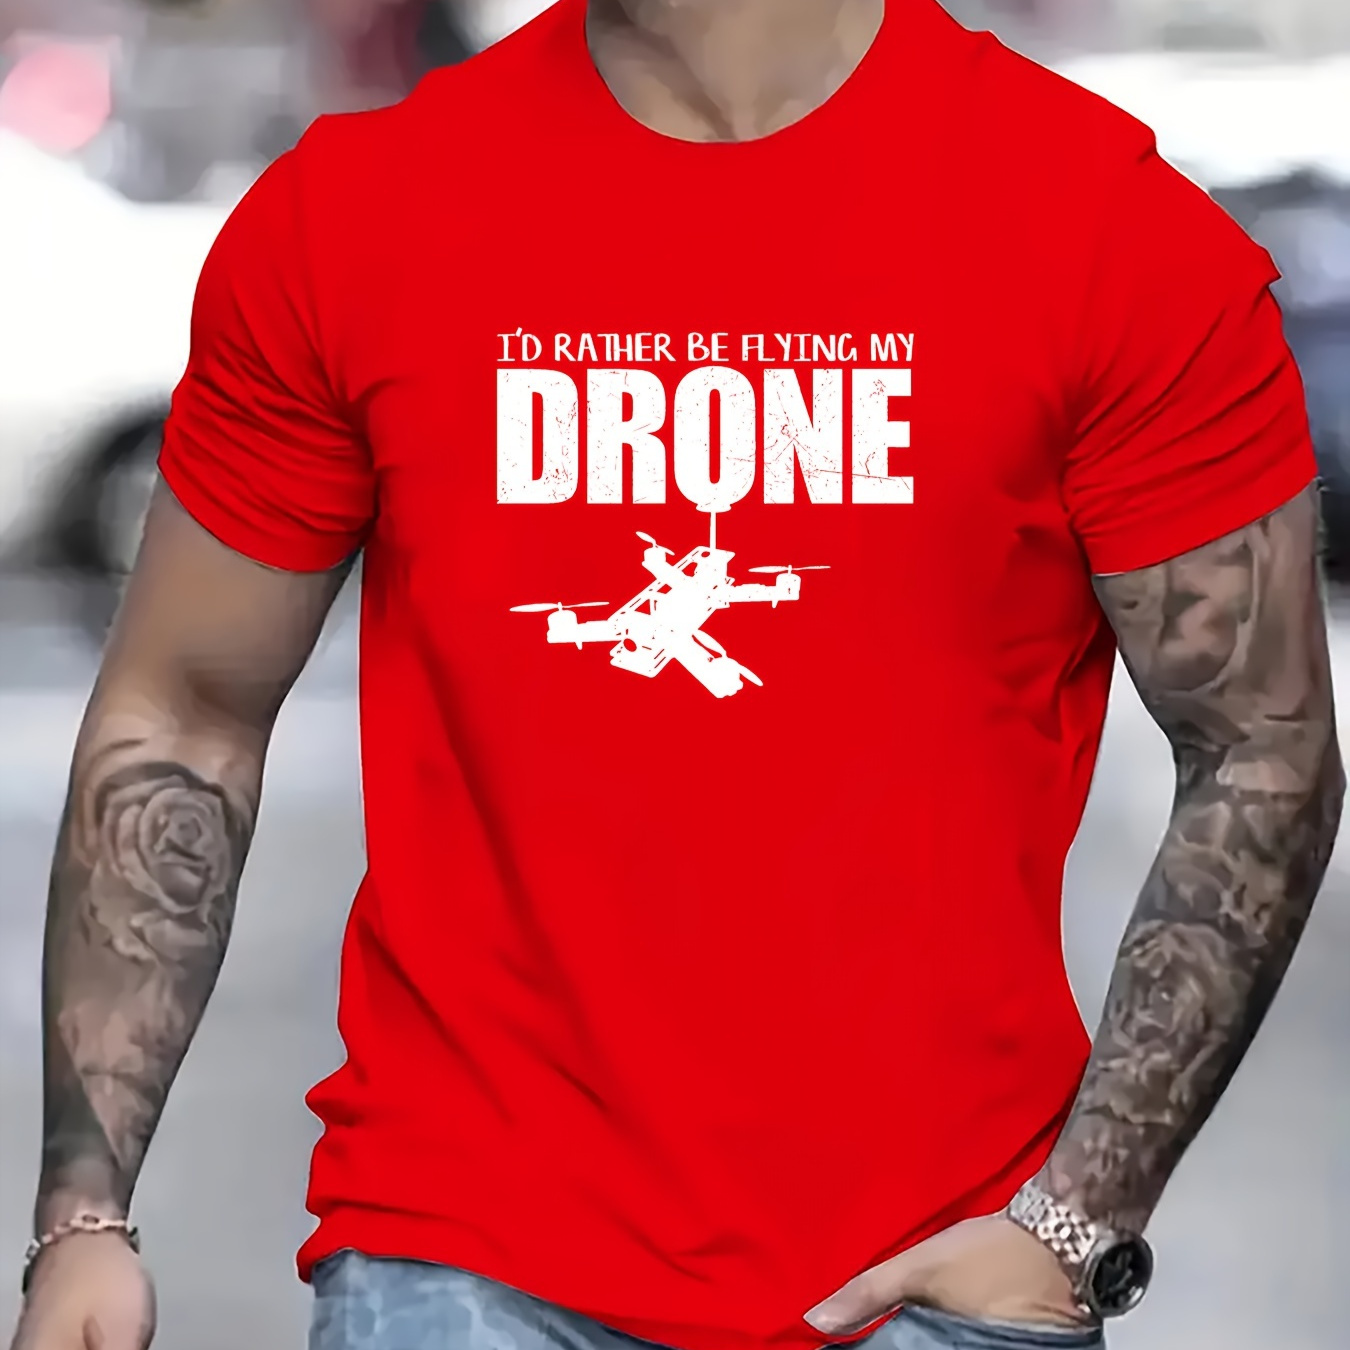 

Flying My Drone Print T Shirt, Tees For Men, Casual Short Sleeve T-shirt For Summer